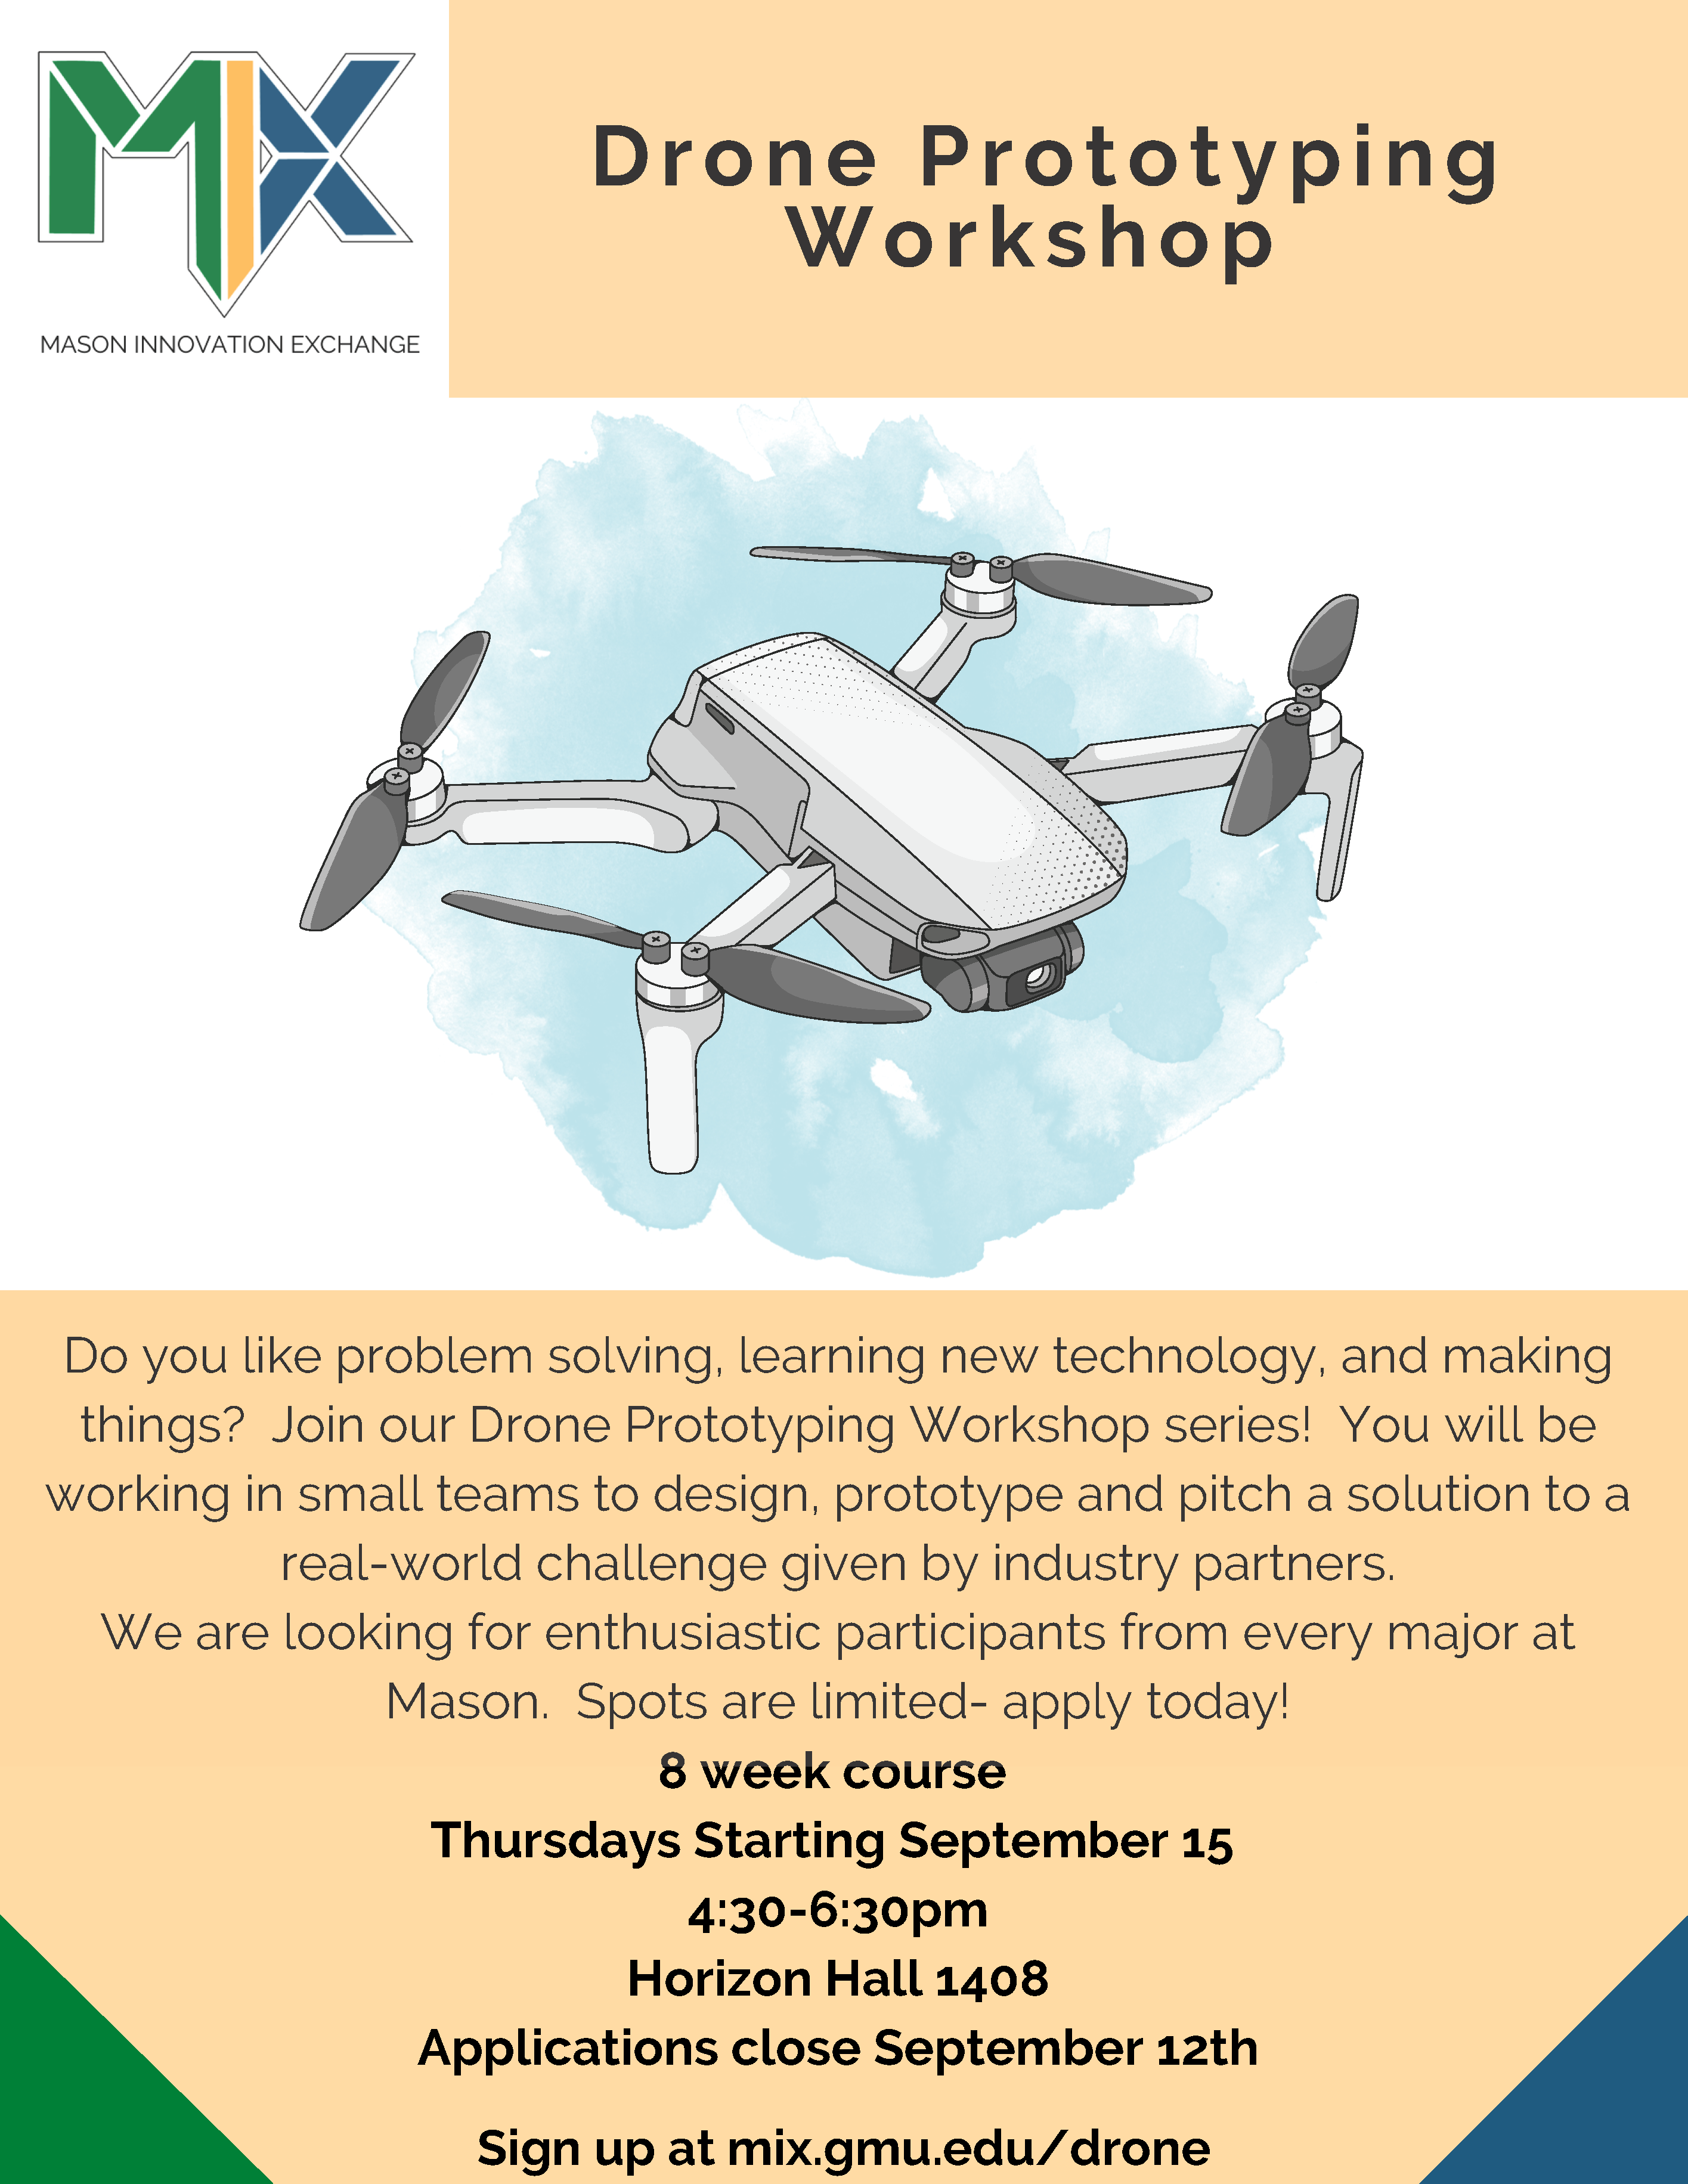 Drone Prototyping Workshop